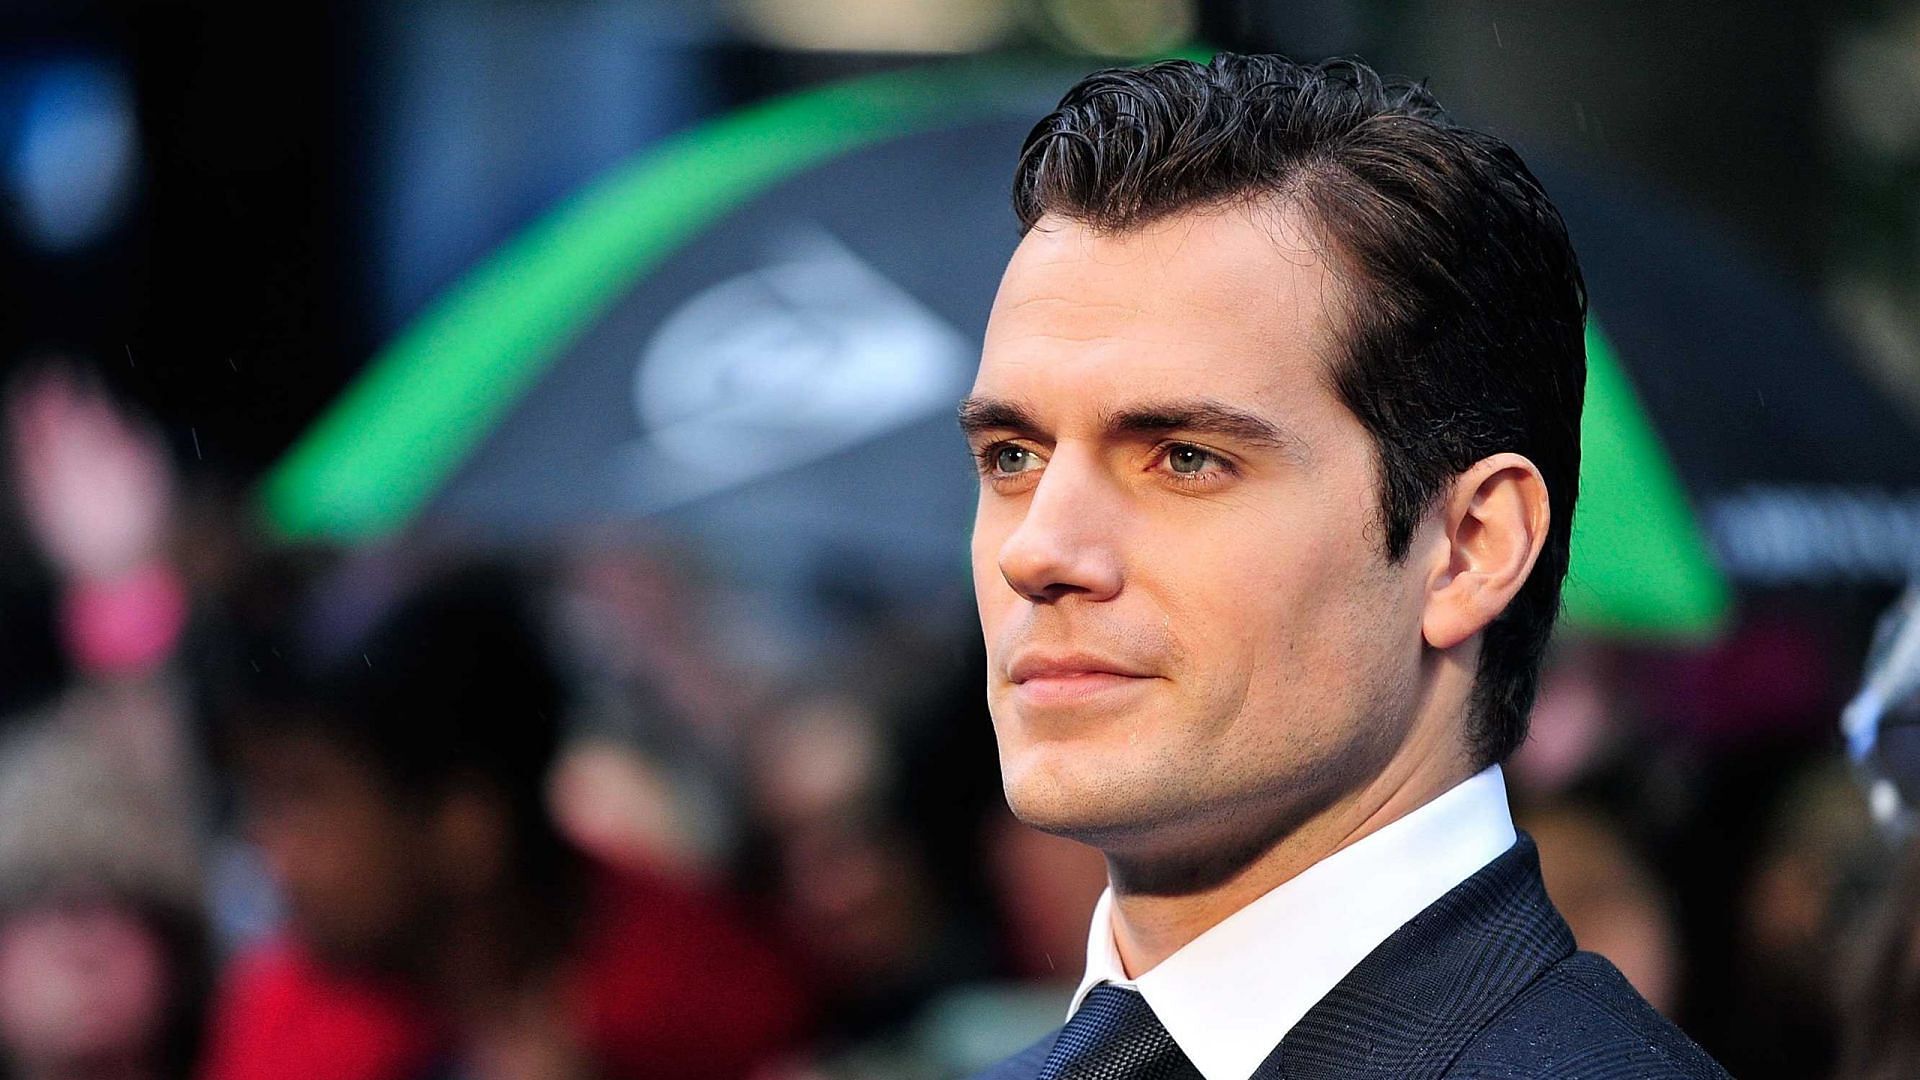 Henry Cavill fans upset as he is cast out of the James Bond race